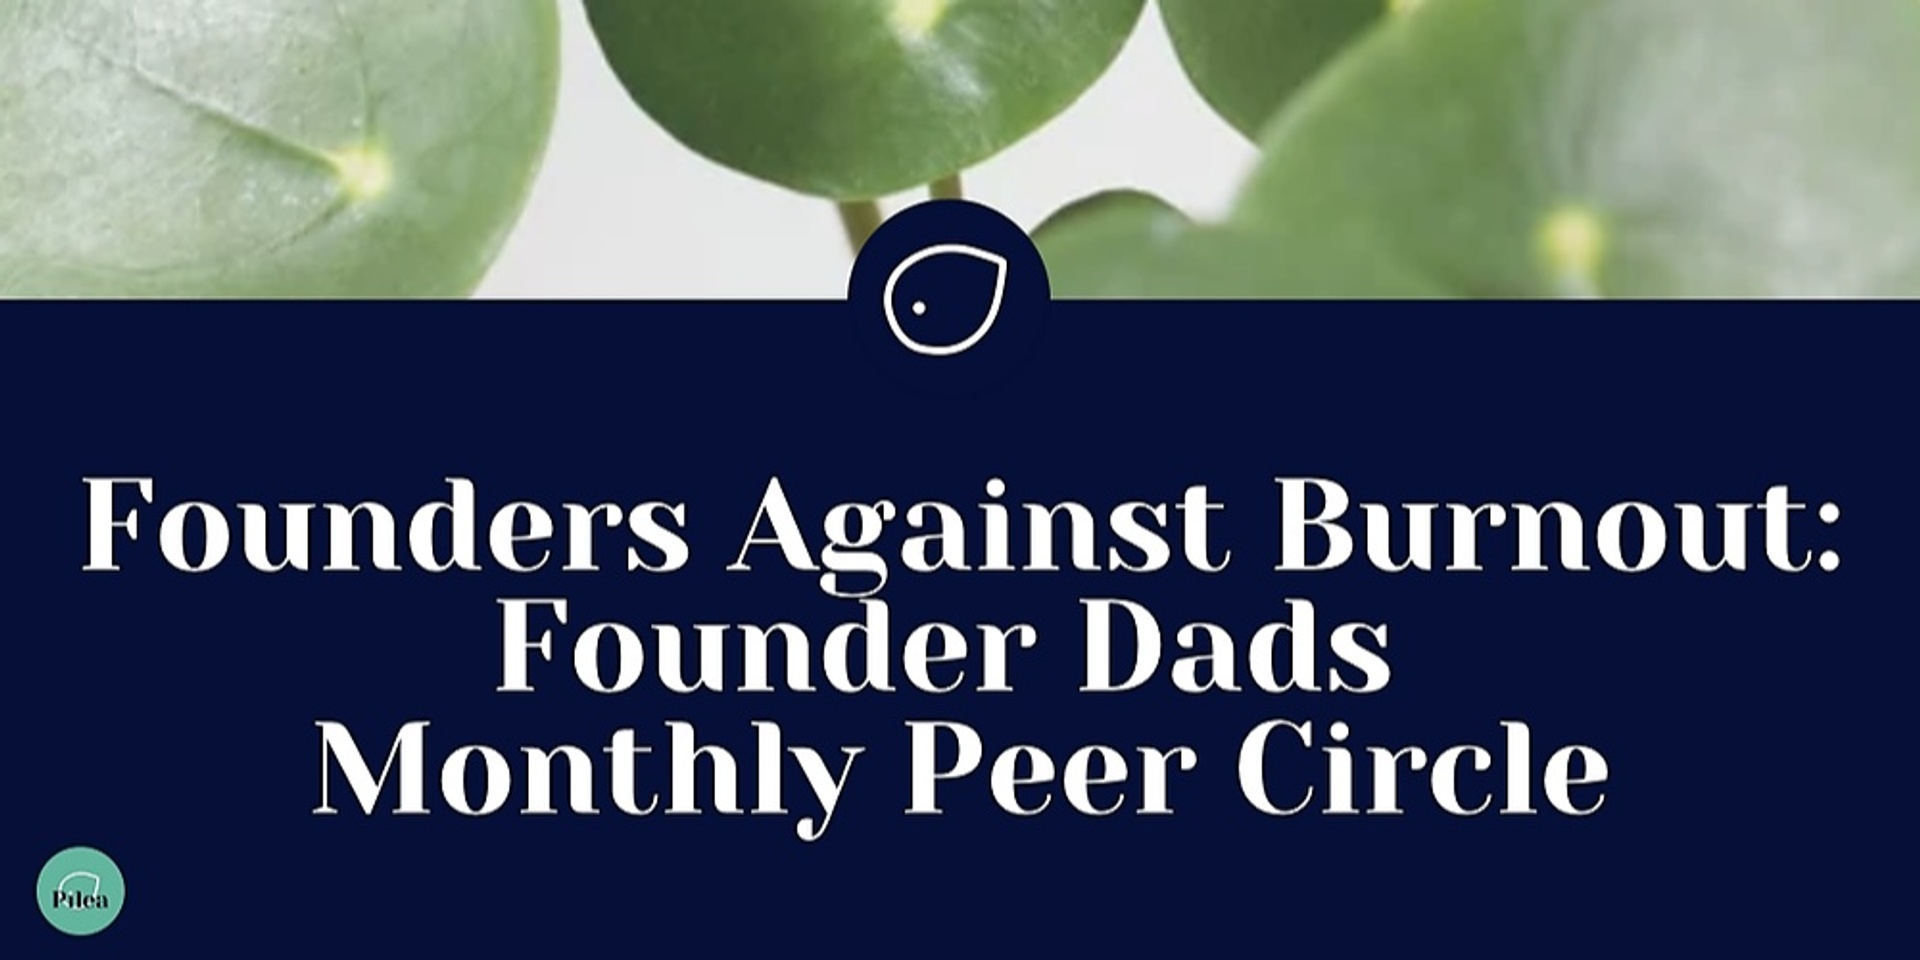 Founders Against Burnout: Founder Dads Monthly Peer Circle